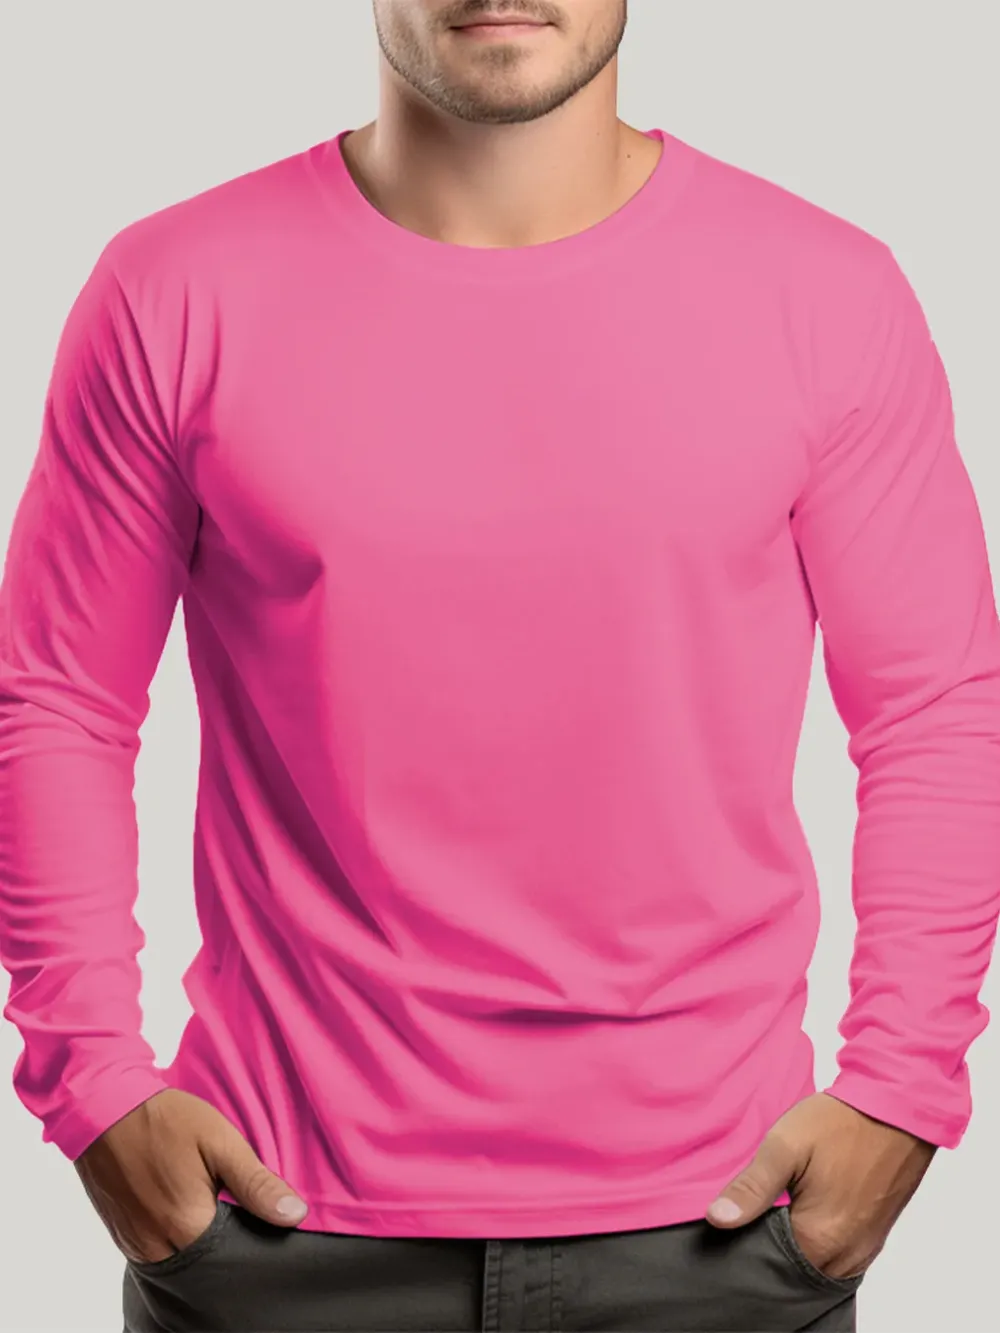 SkyLine-High-Visibility-Long-Sleeves-Shirt-neon-pink